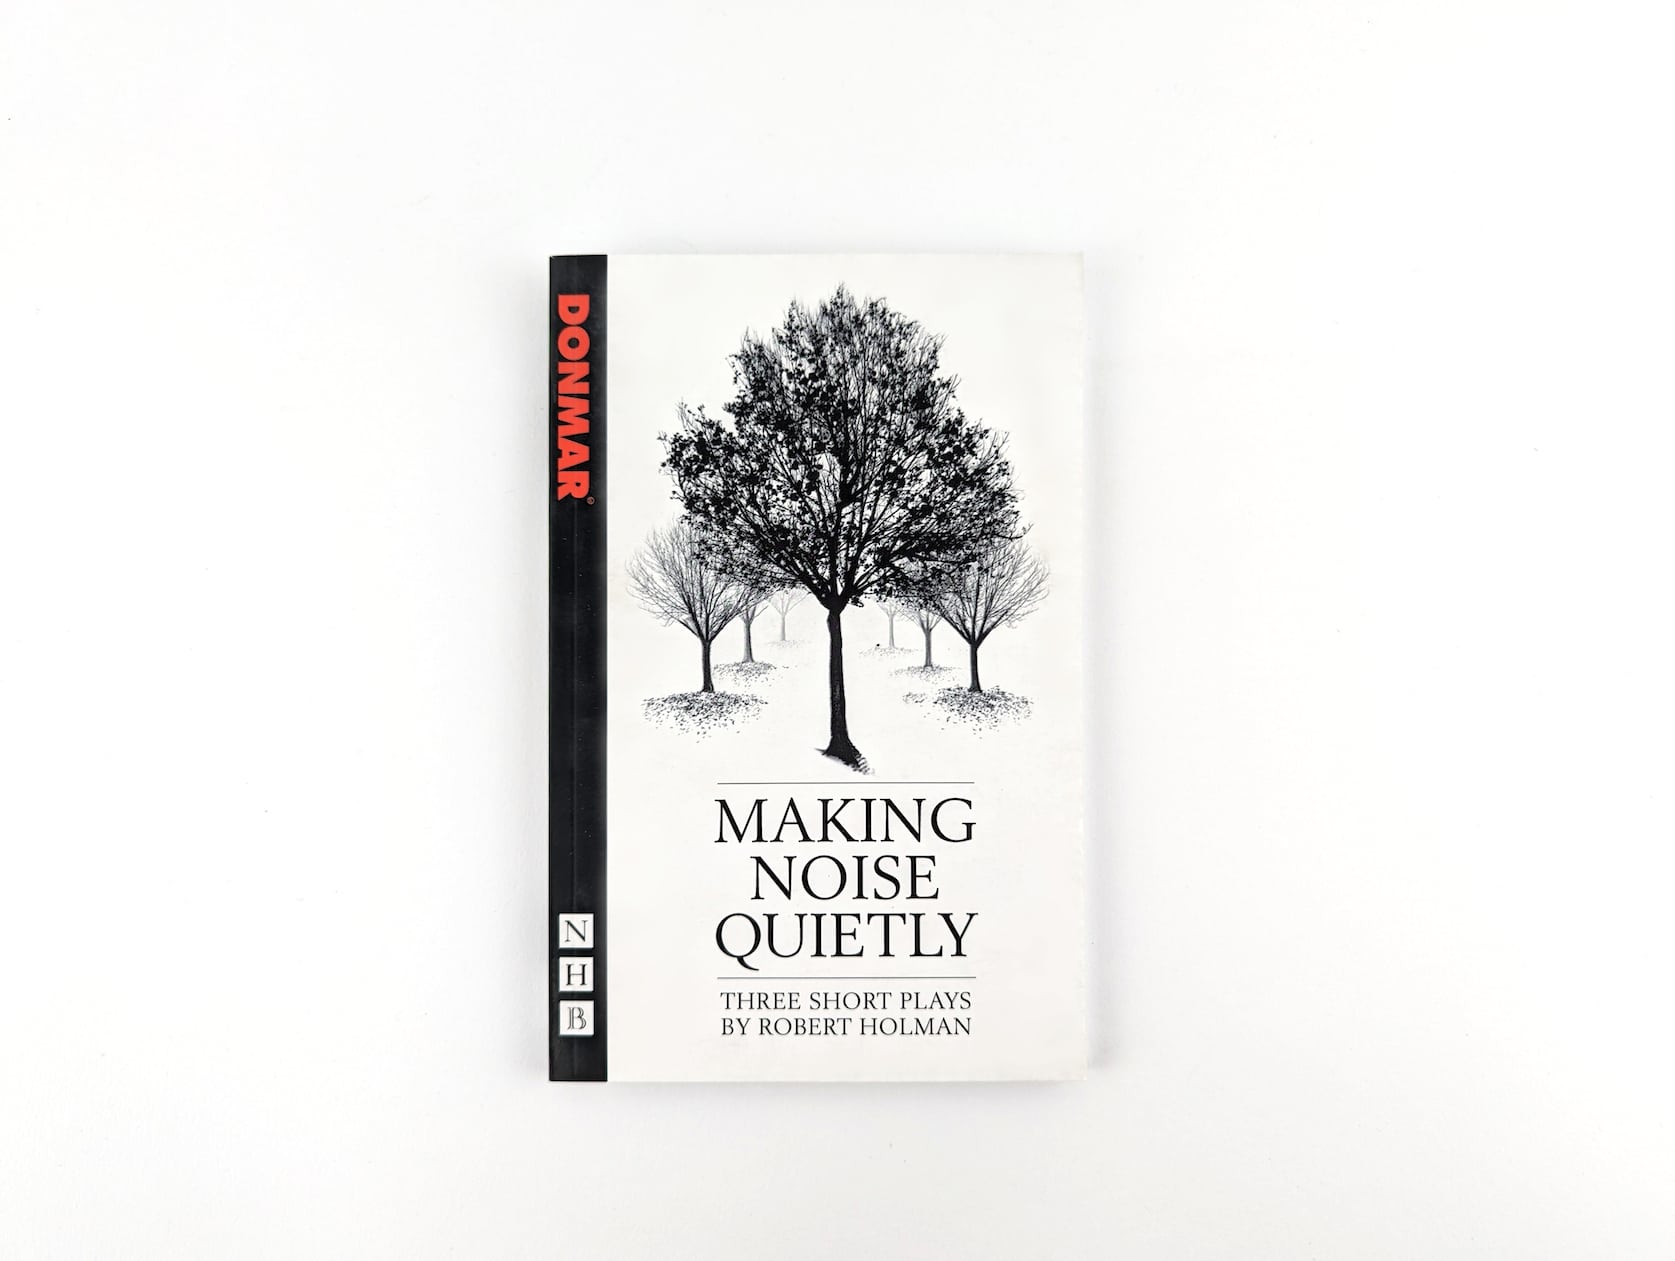 Making Noise Quietly by Robert Holman